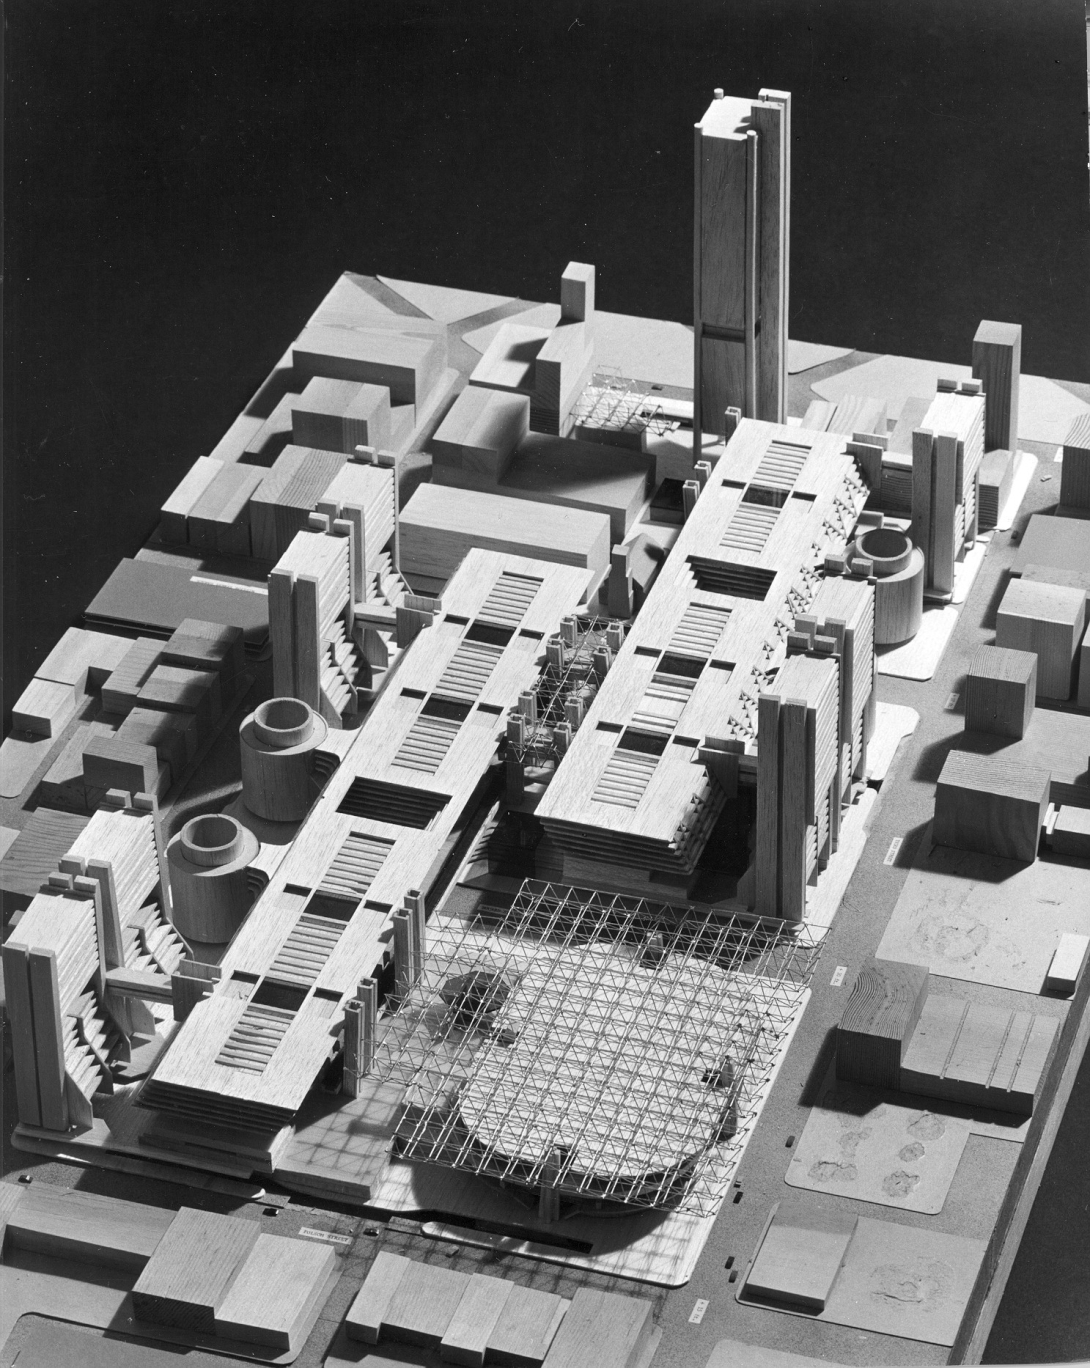 Black & white photo of an architectural model